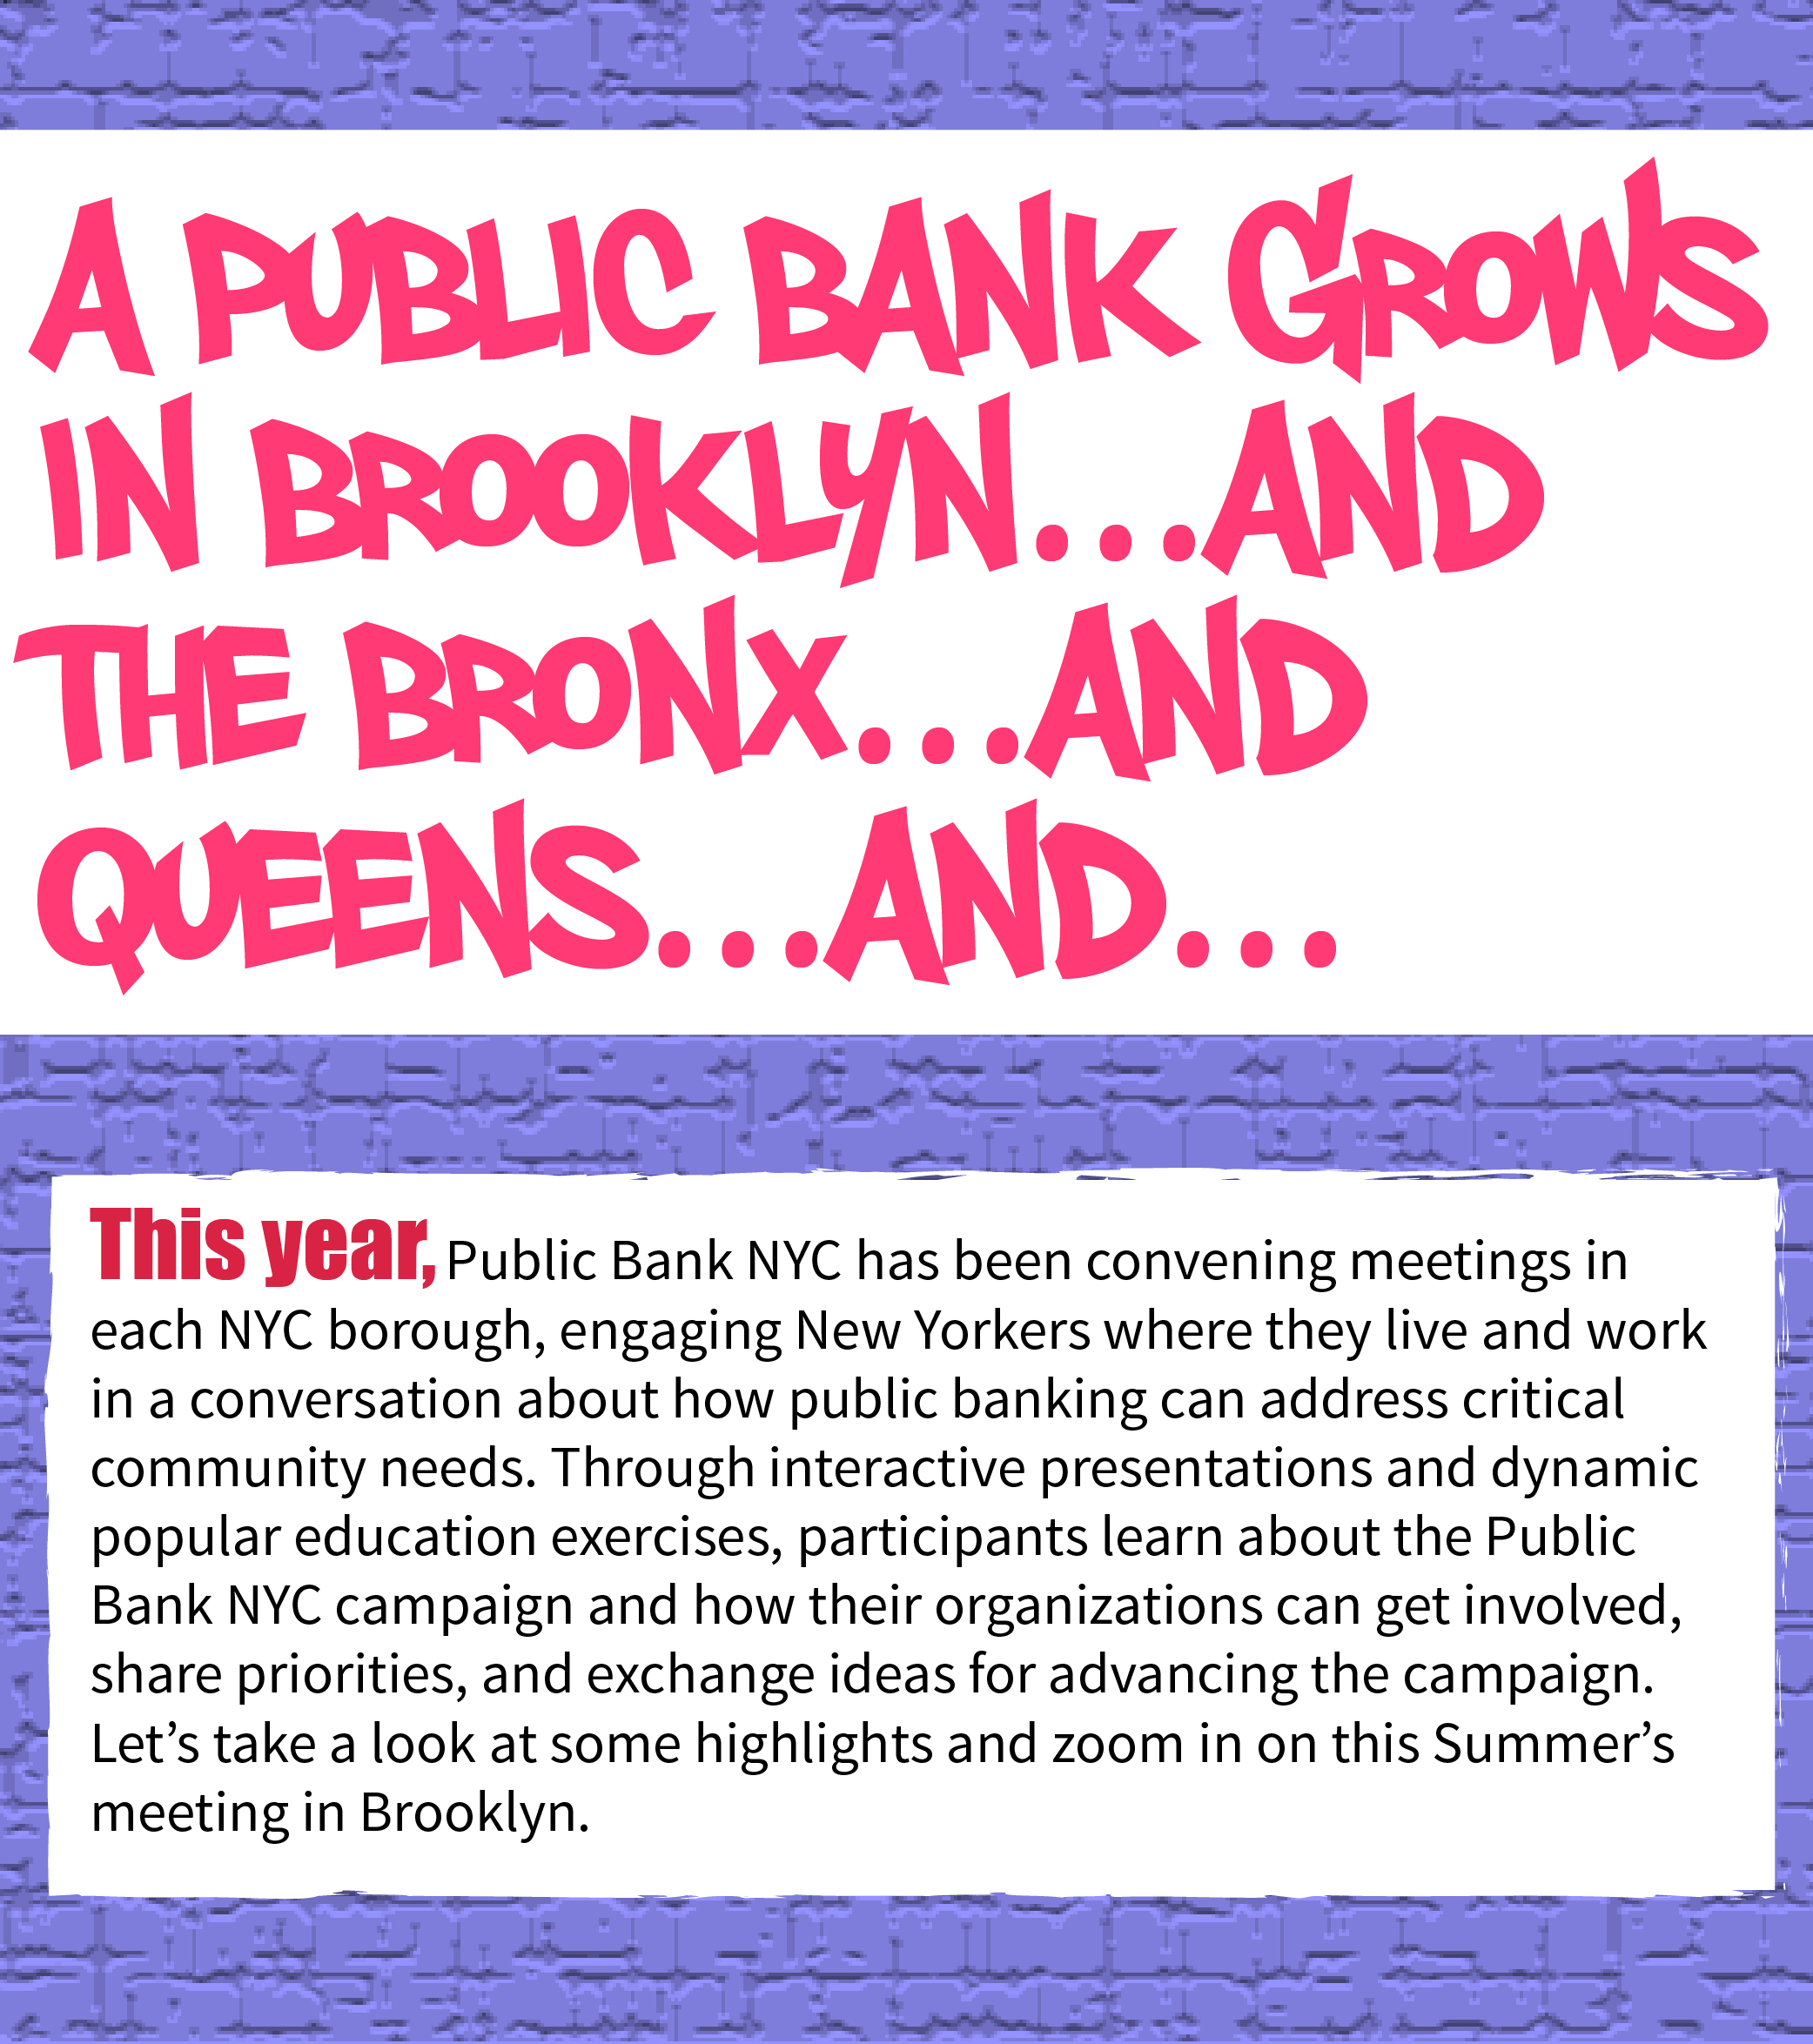 A Public Bank Grows in Brooklyn…and The Bronx…and Queens…And…